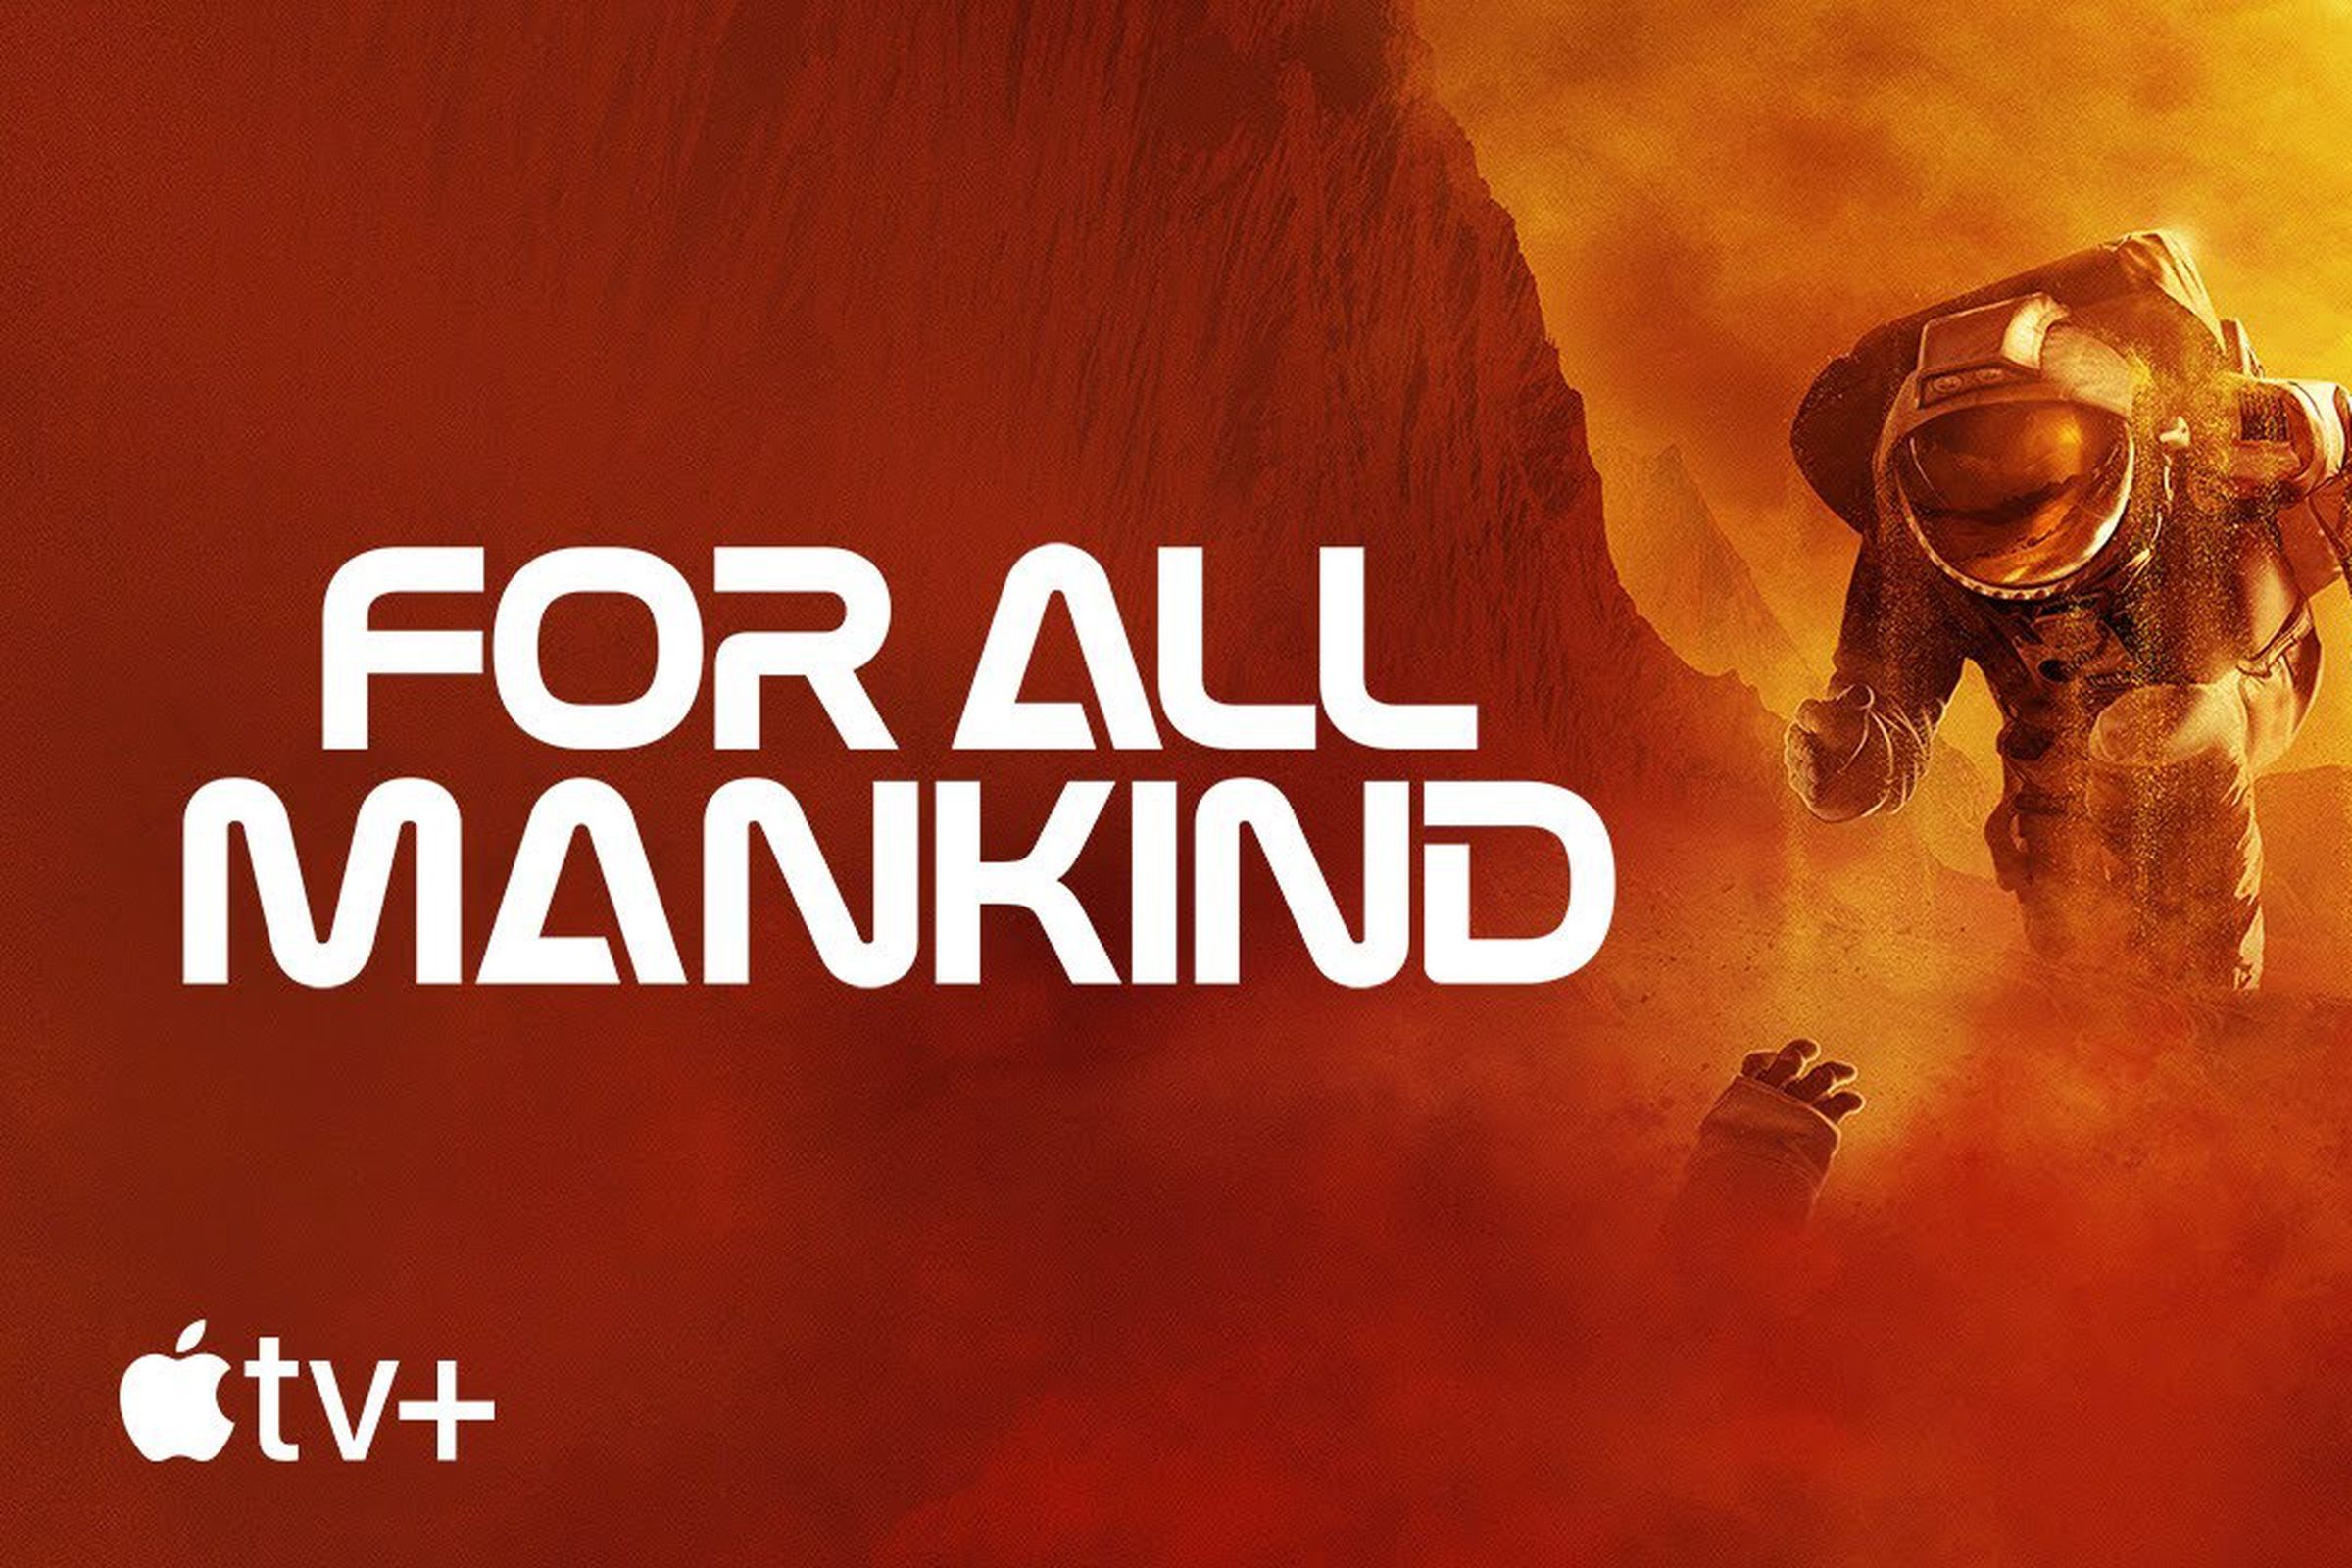 For All Mankind’s third season just started.